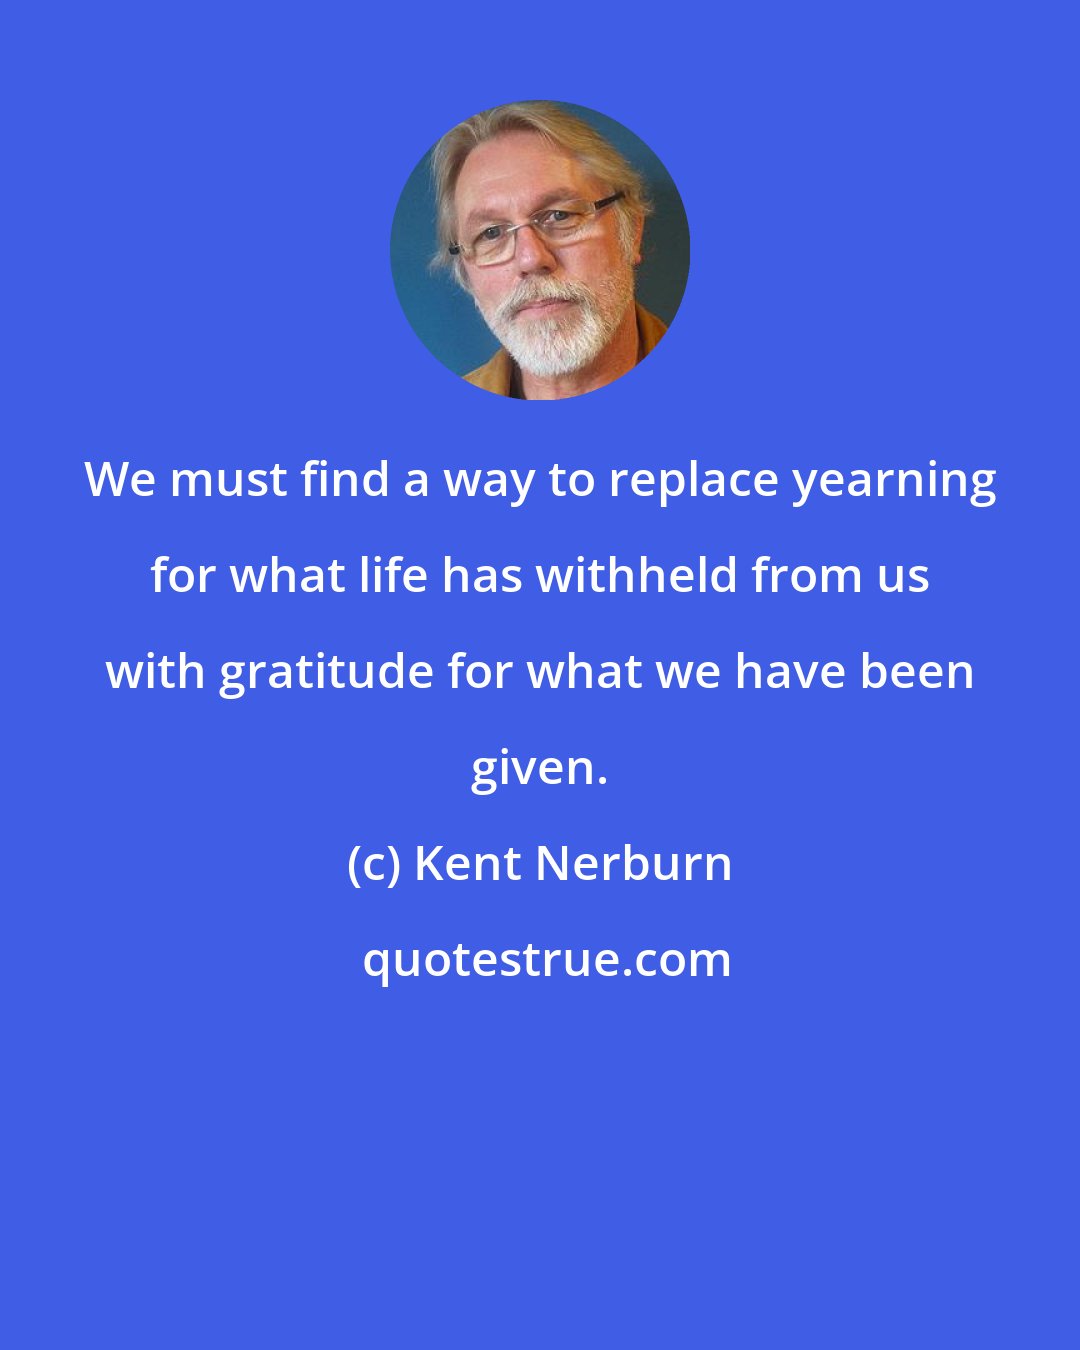 Kent Nerburn: We must find a way to replace yearning for what life has withheld from us with gratitude for what we have been given.